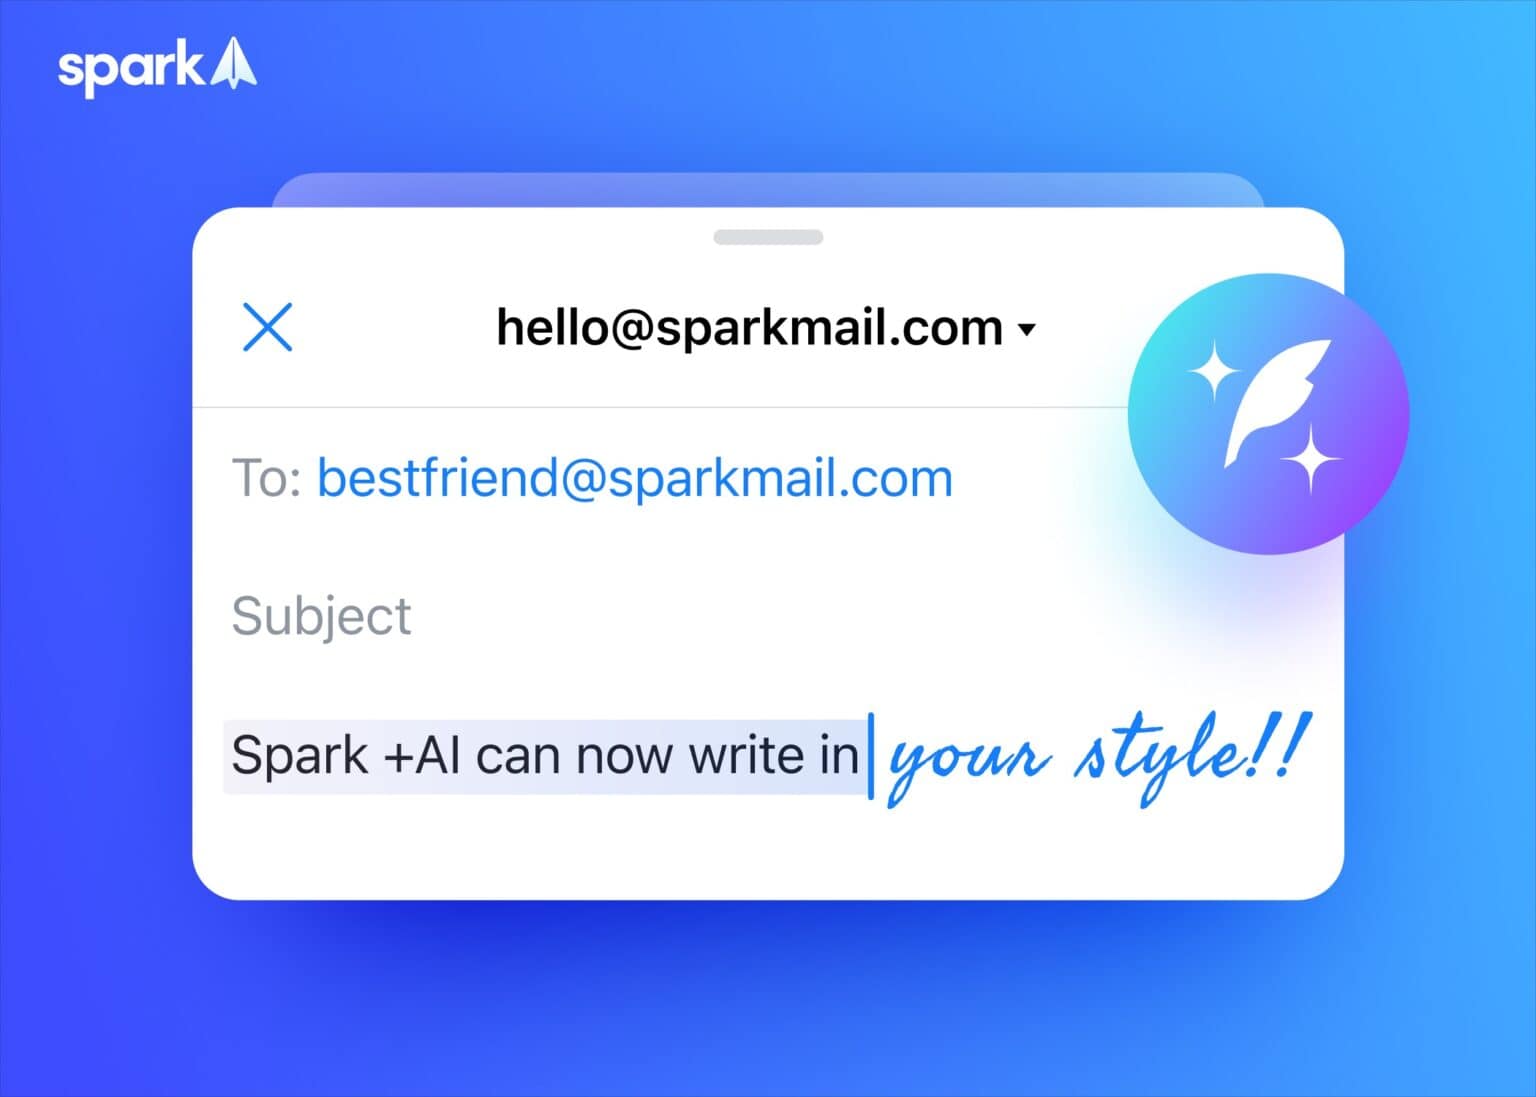 Spark email app gains My Writing Style feature